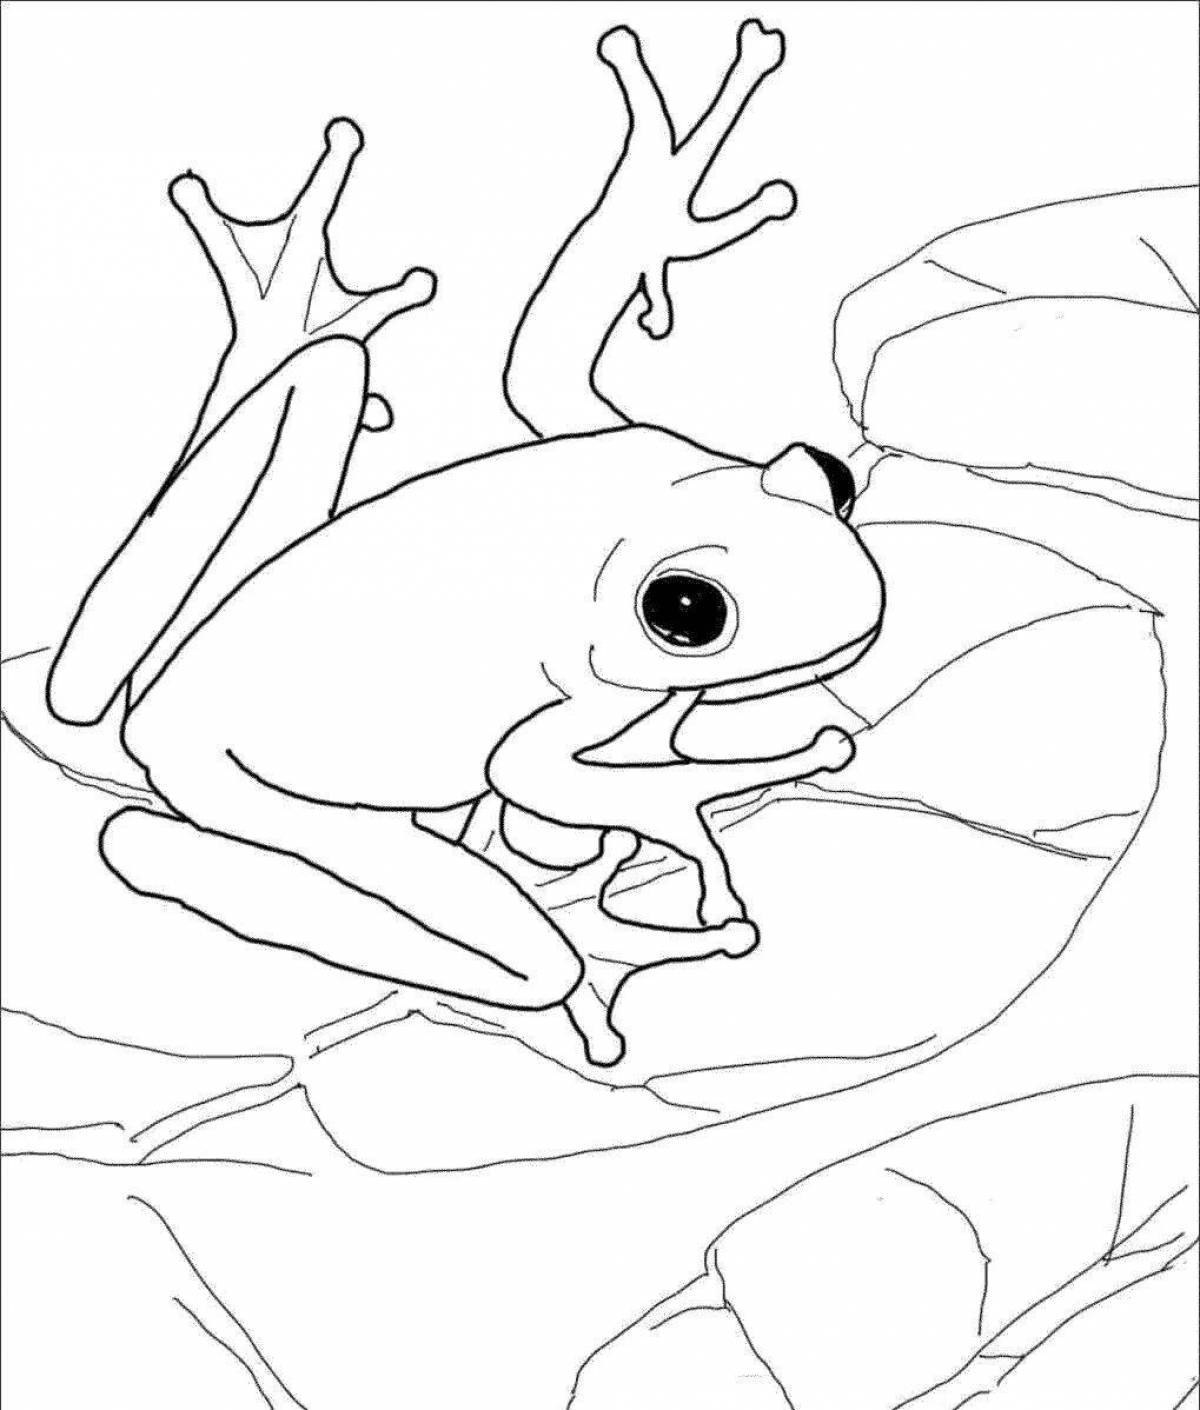 Amazing dart frog coloring page